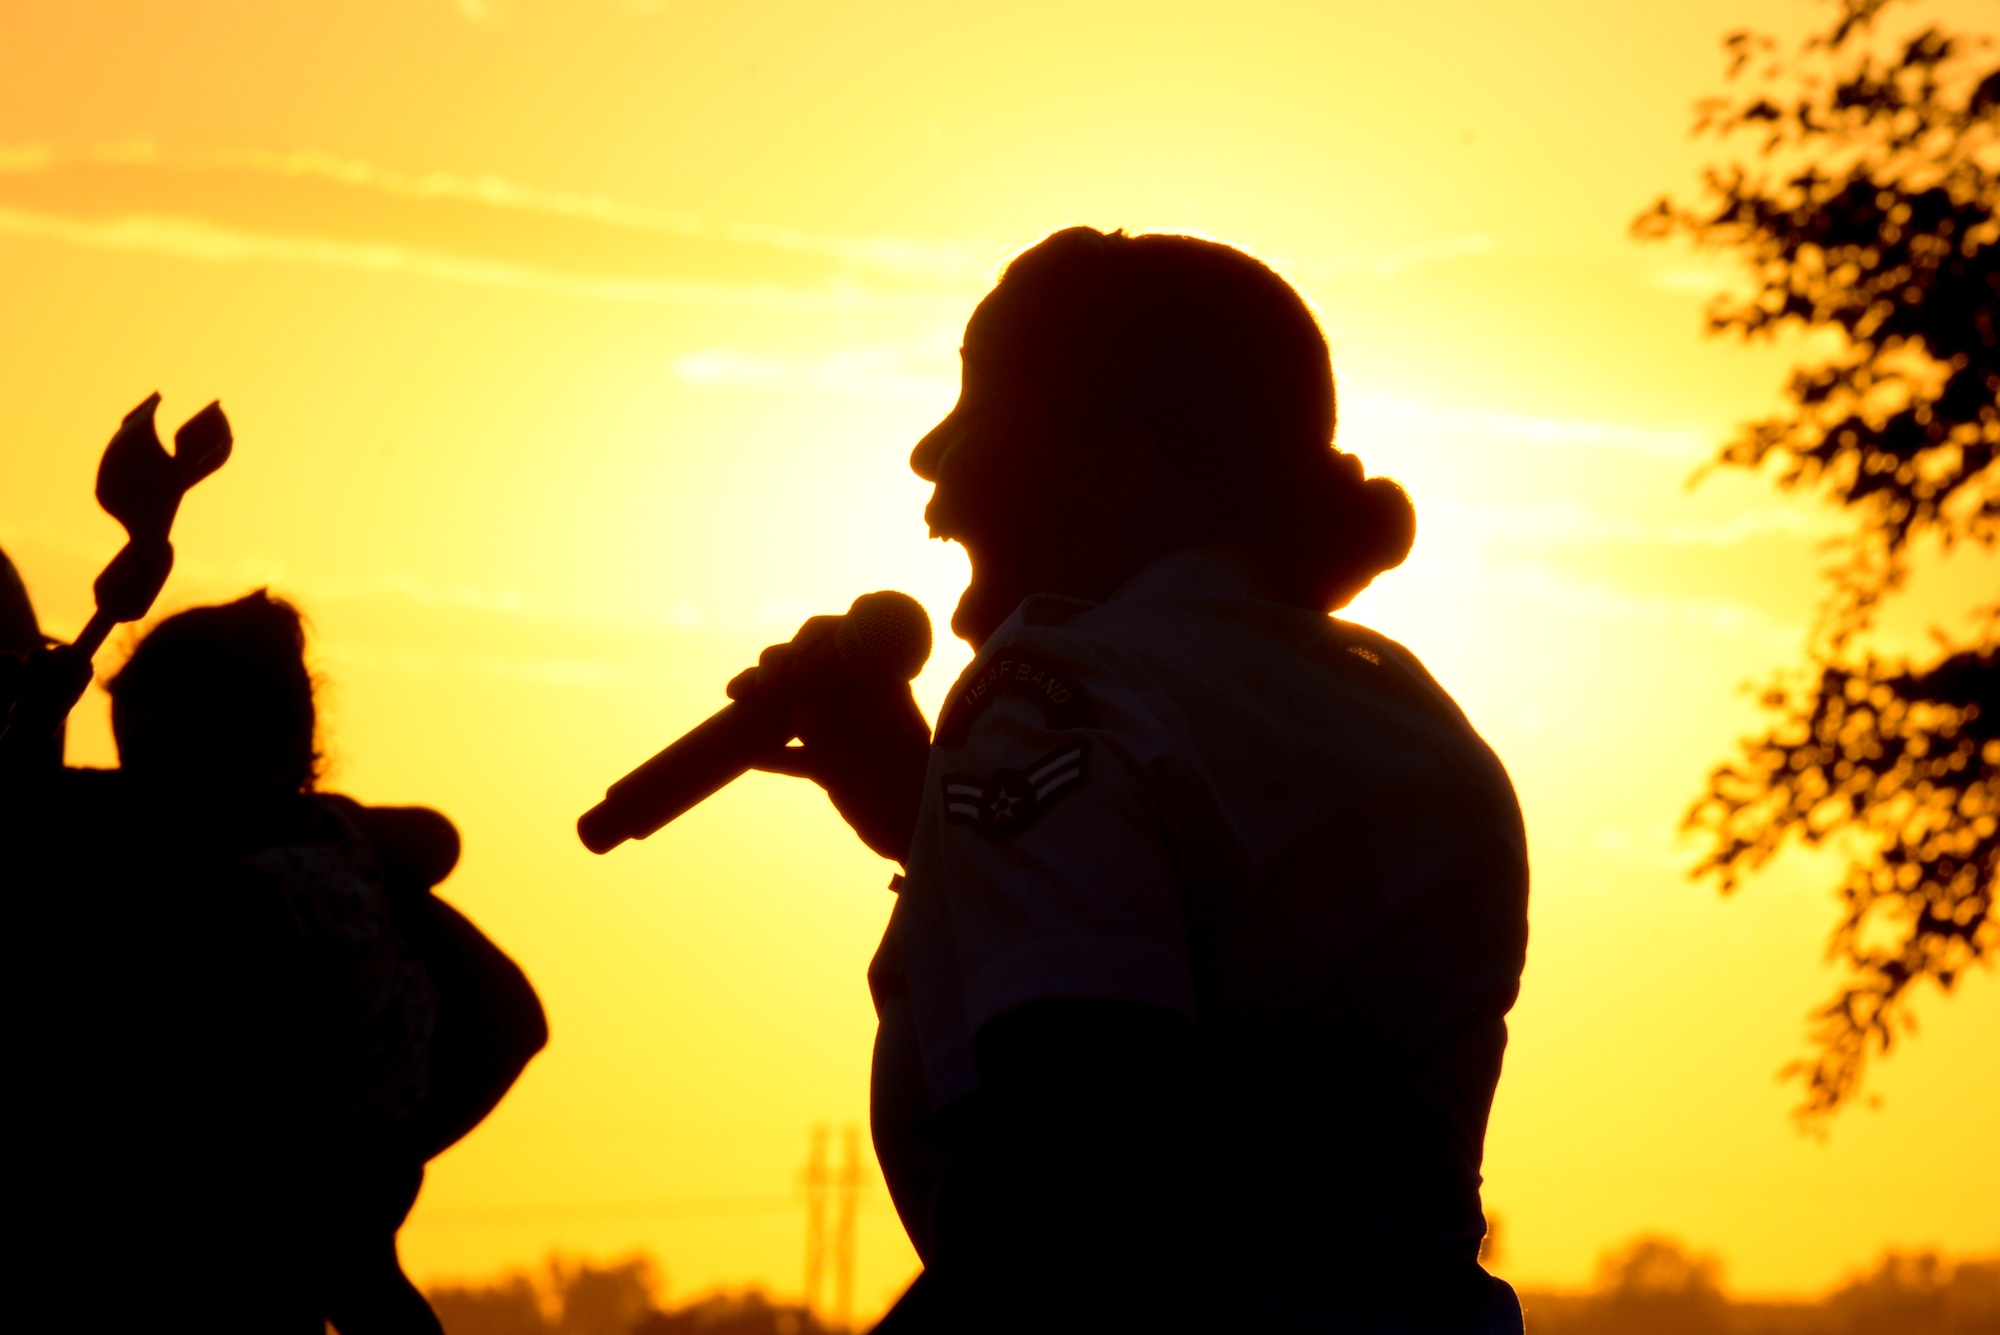 Airman 1st Class Sierra Bailey, a vocalist with the U.S. Heartland of America Band, sings at Offutt’s base lake on July 8, 2017 during the annual fireworks display. The Heartland of America Band is a group of Air Force professional musicians whose backgrounds include advanced degrees in music performance and whose broad mastery of musical styles range from classic to contemporary, jazz to country and pop to rock. (U.S. Air Force photo by Zachary Hada)